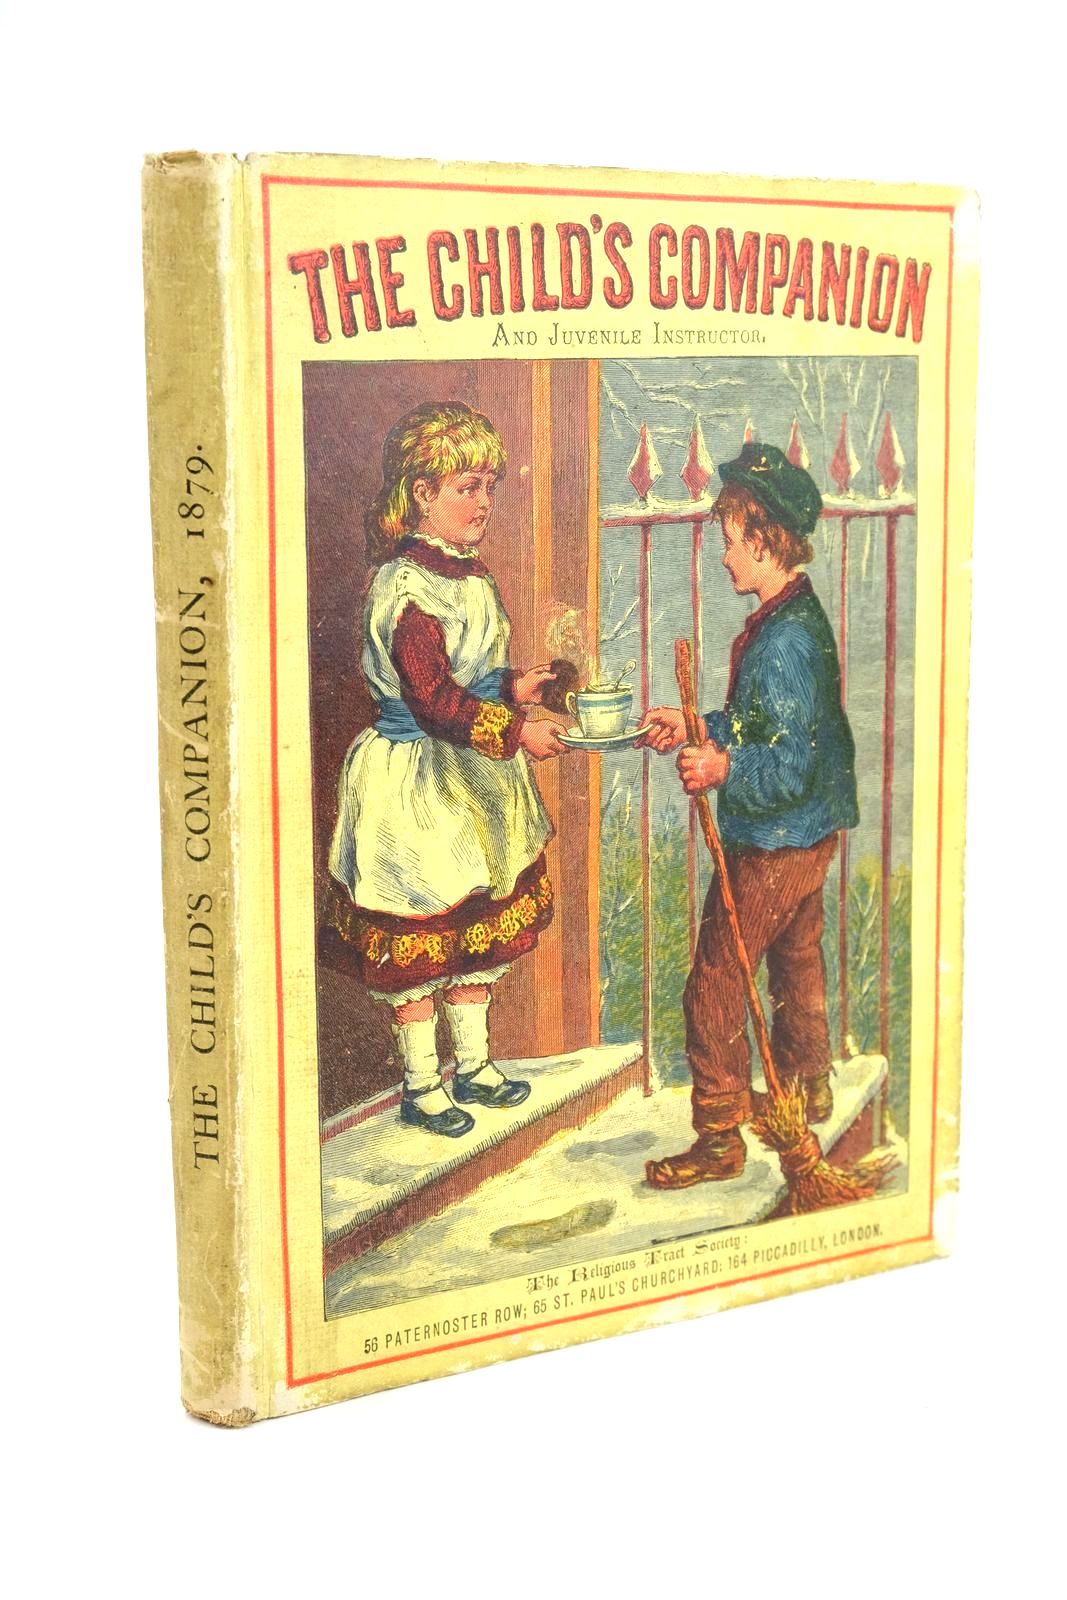 Photo of THE CHILD'S COMPANION AND JUVENILE INSTRUCTOR published by The Religious Tract Society (STOCK CODE: 1323275)  for sale by Stella & Rose's Books